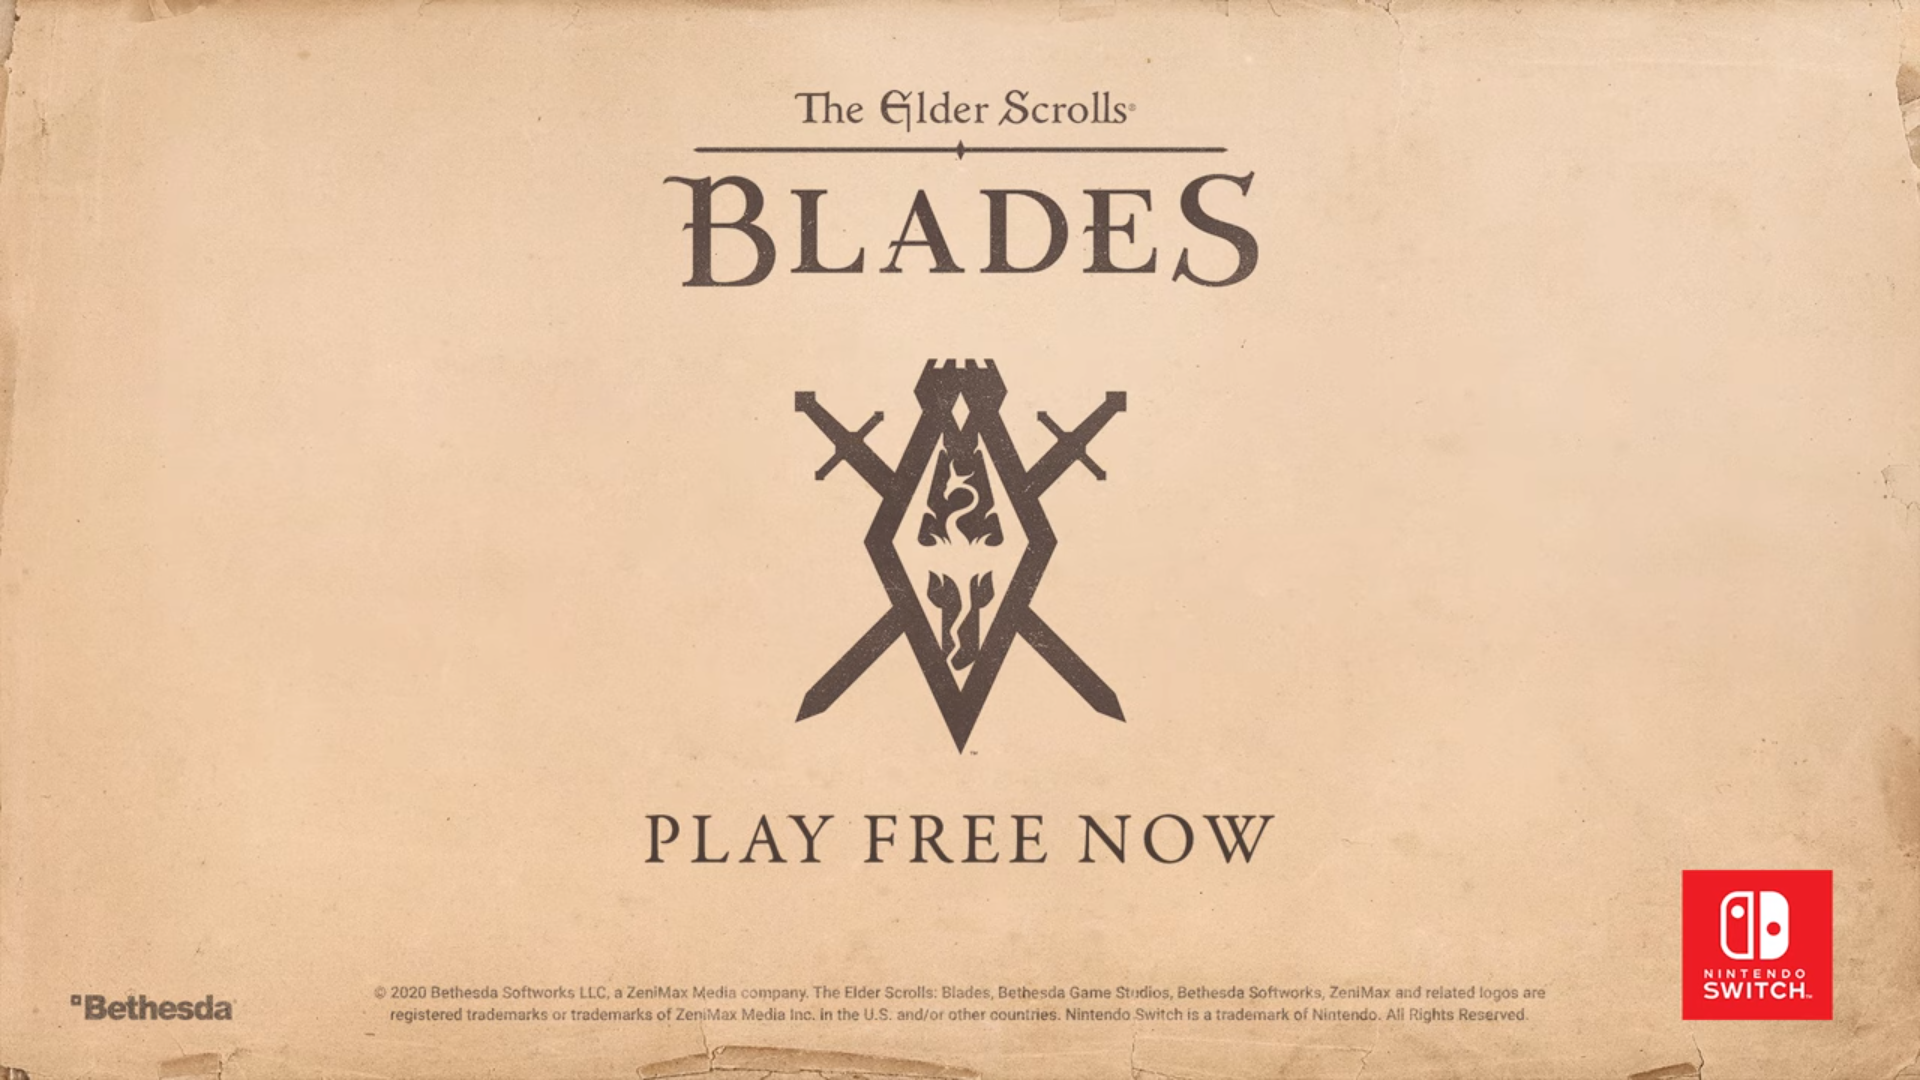 Image for The Elder Scrolls: Blades is now available on Nintendo Switch